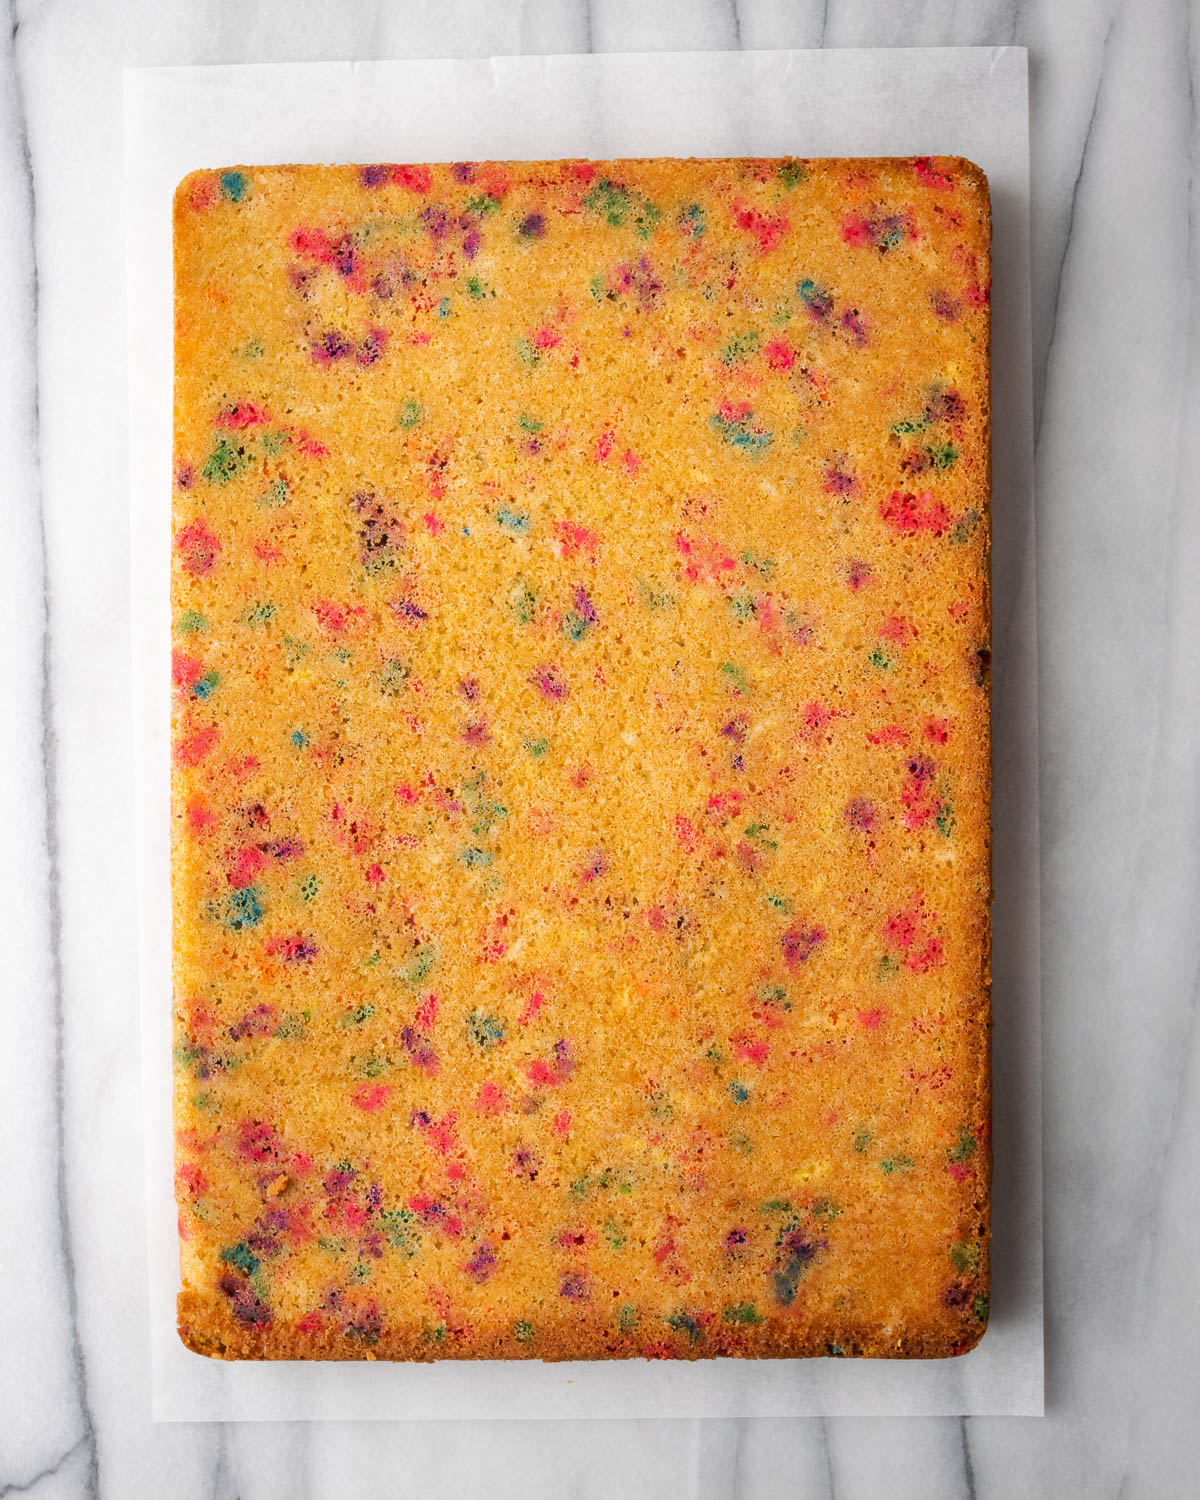 A funfetti sheet cake laid out on a piece of parchment paper.